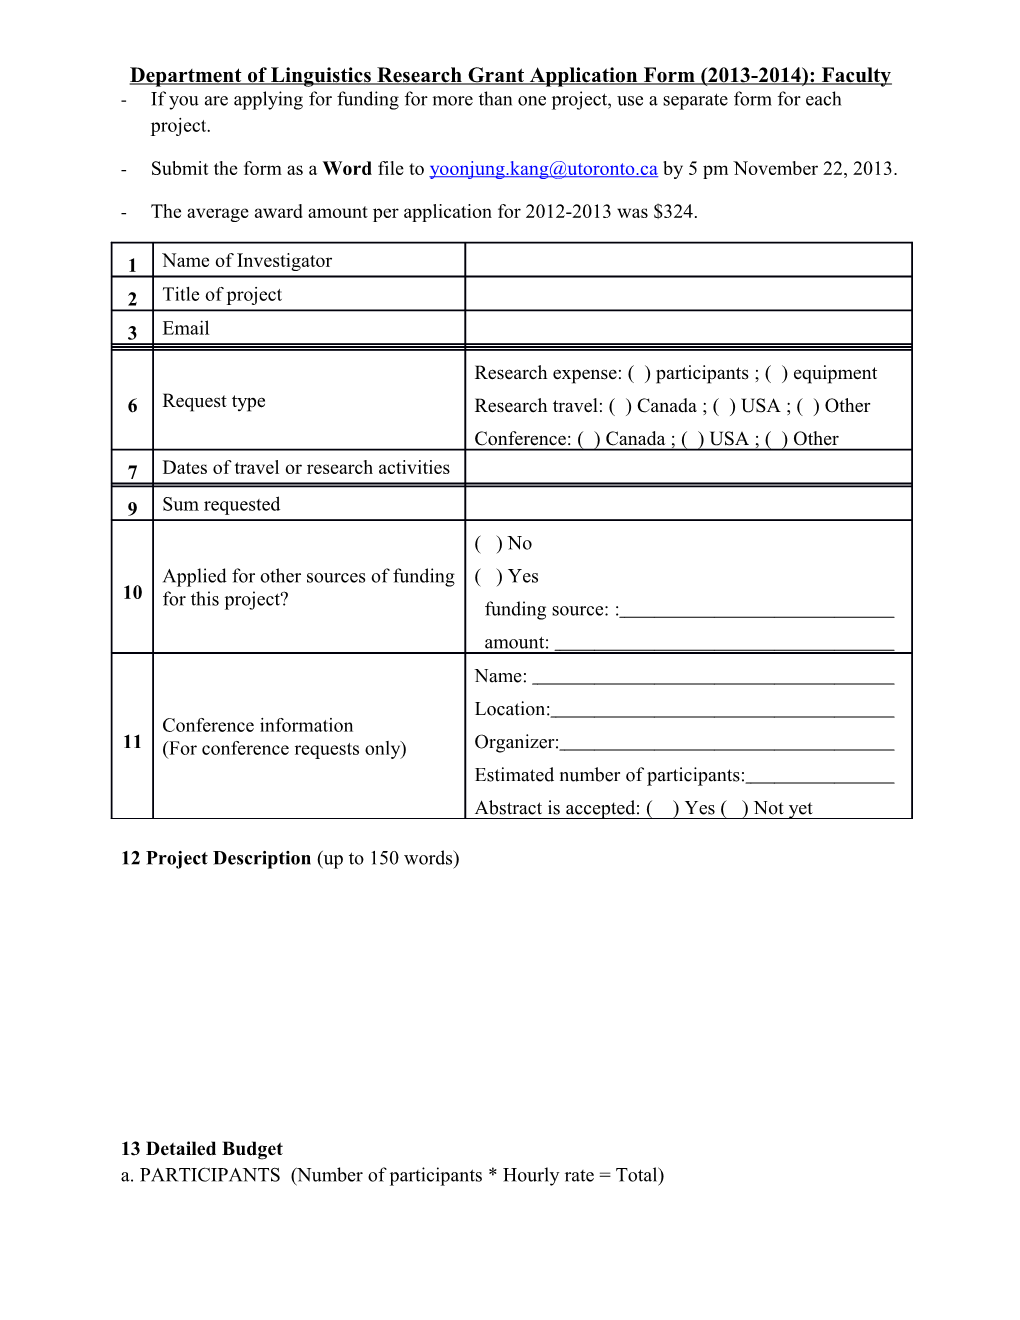 Department of Linguistics Research Grant Application Form (2013-2014):Faculty